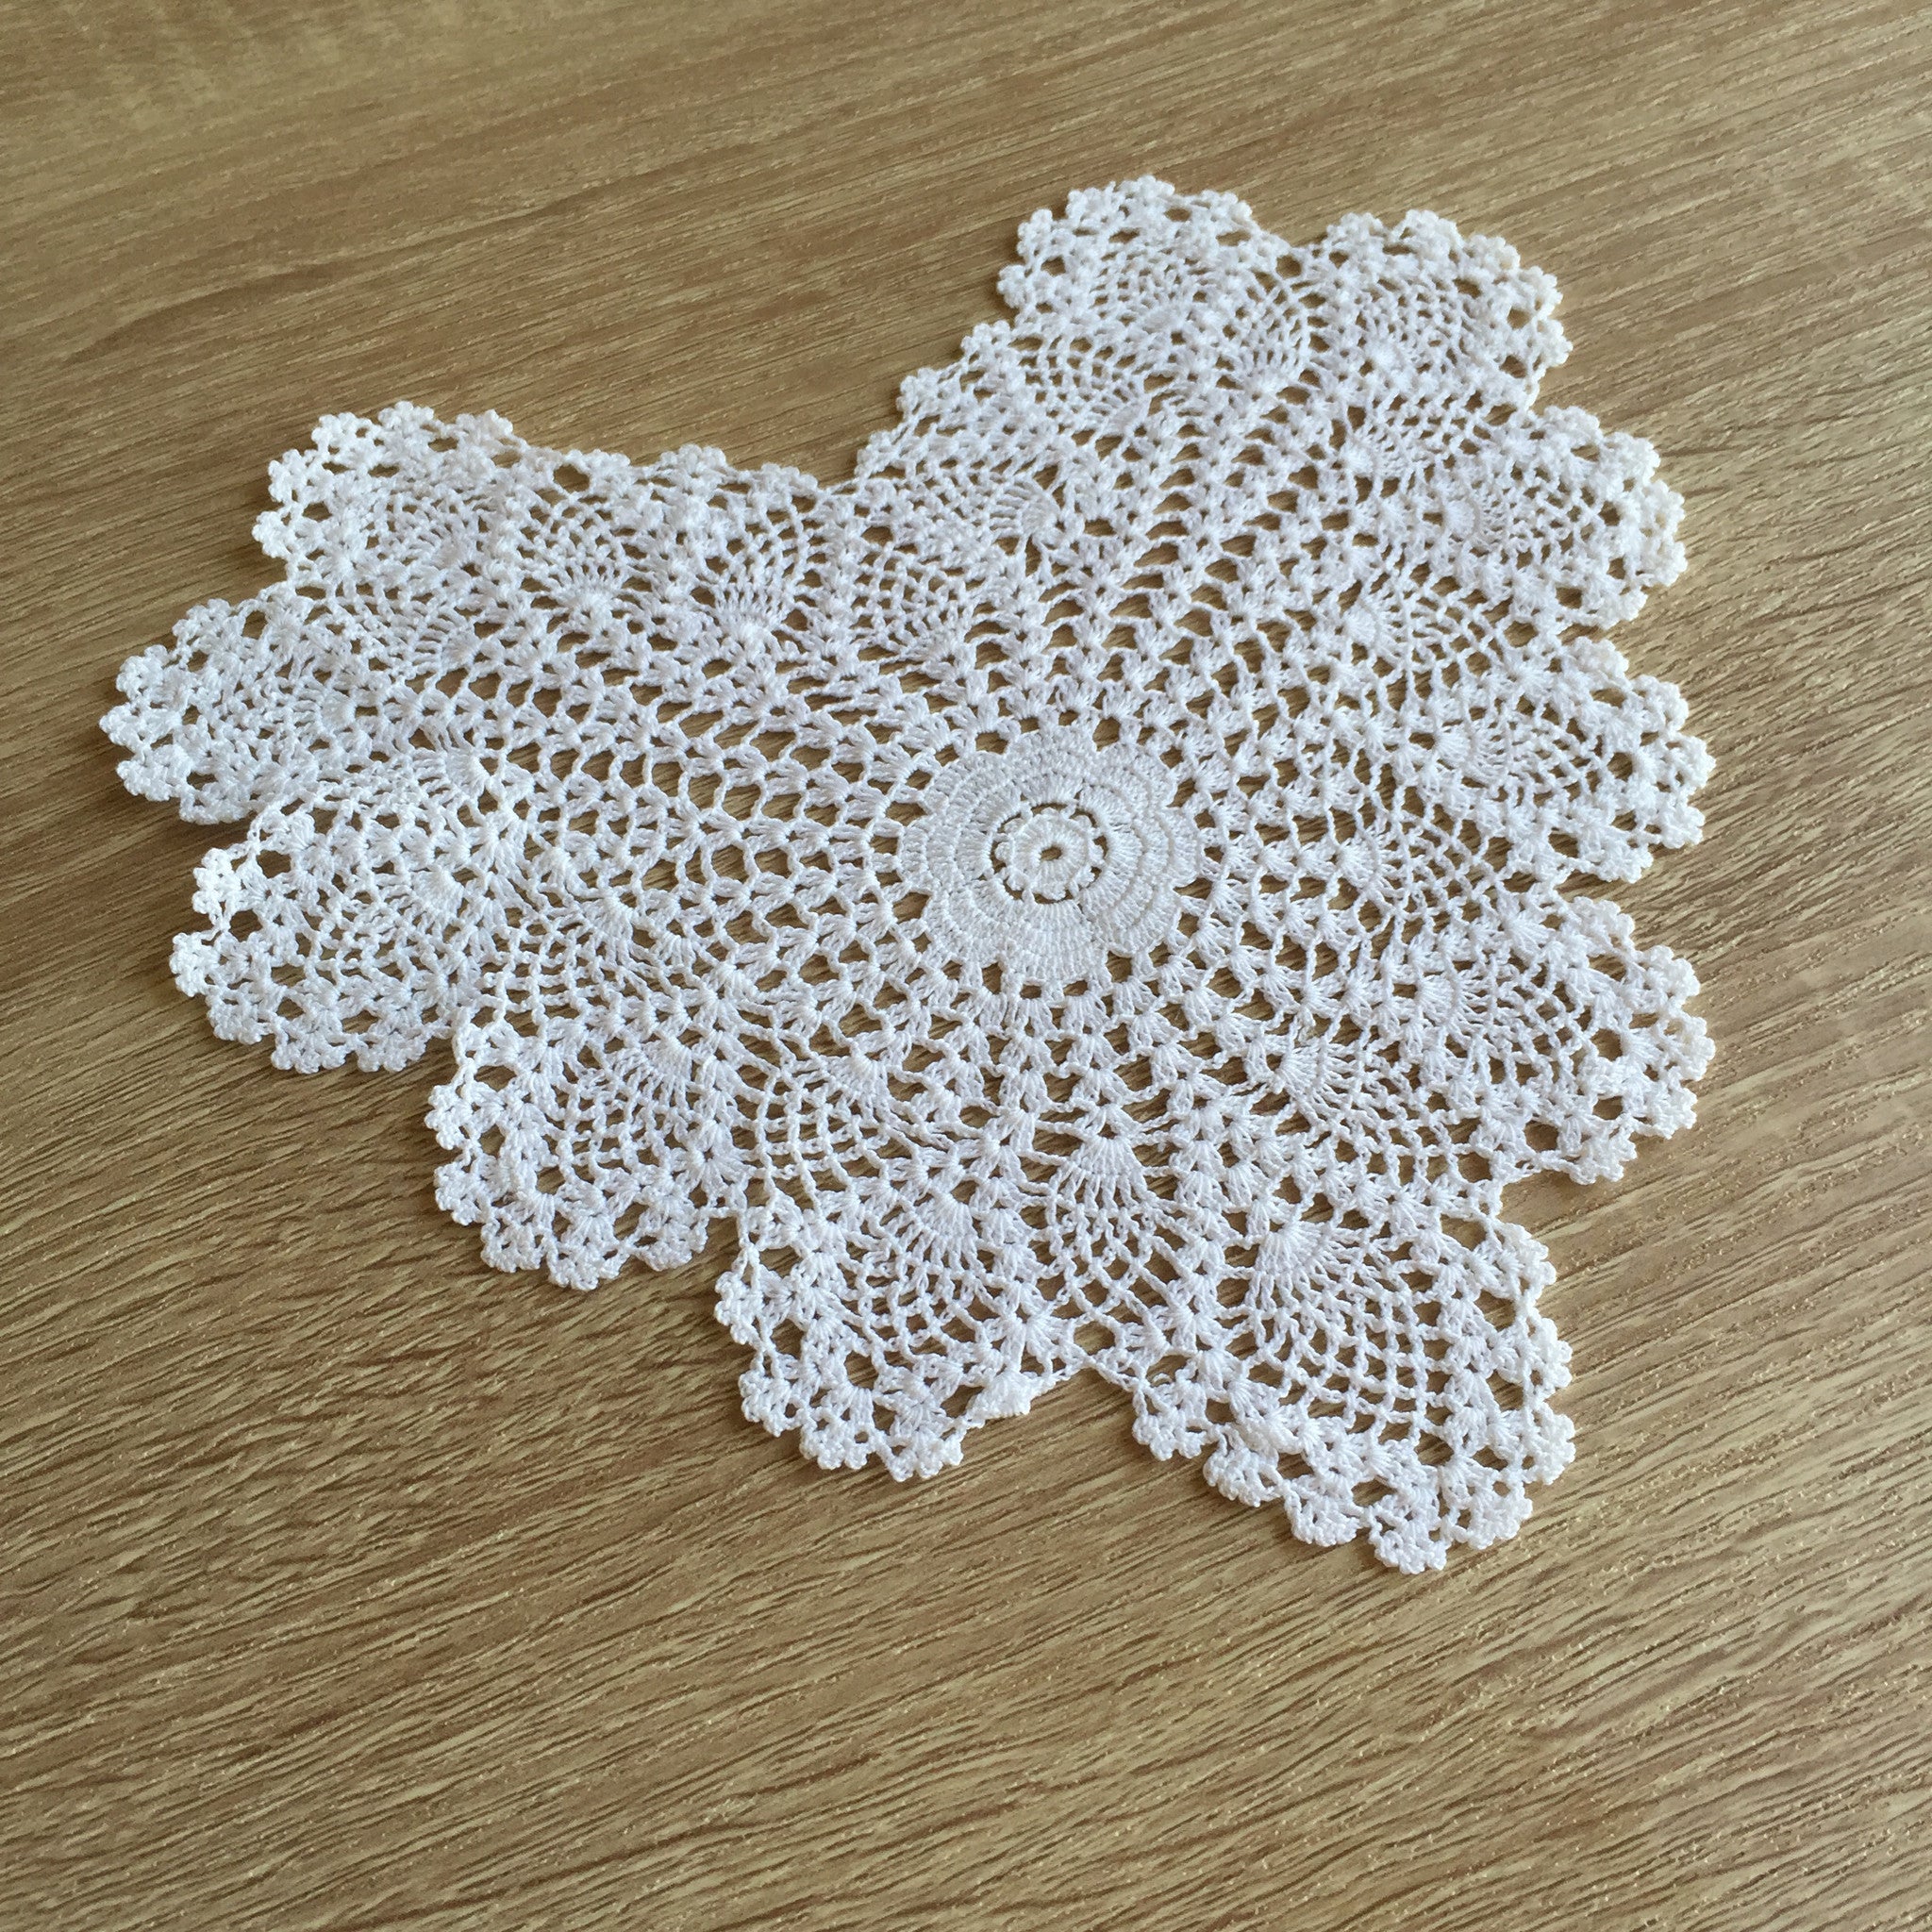 Pineapple Heart Shaped Doilies White 8" Inch Set of 12